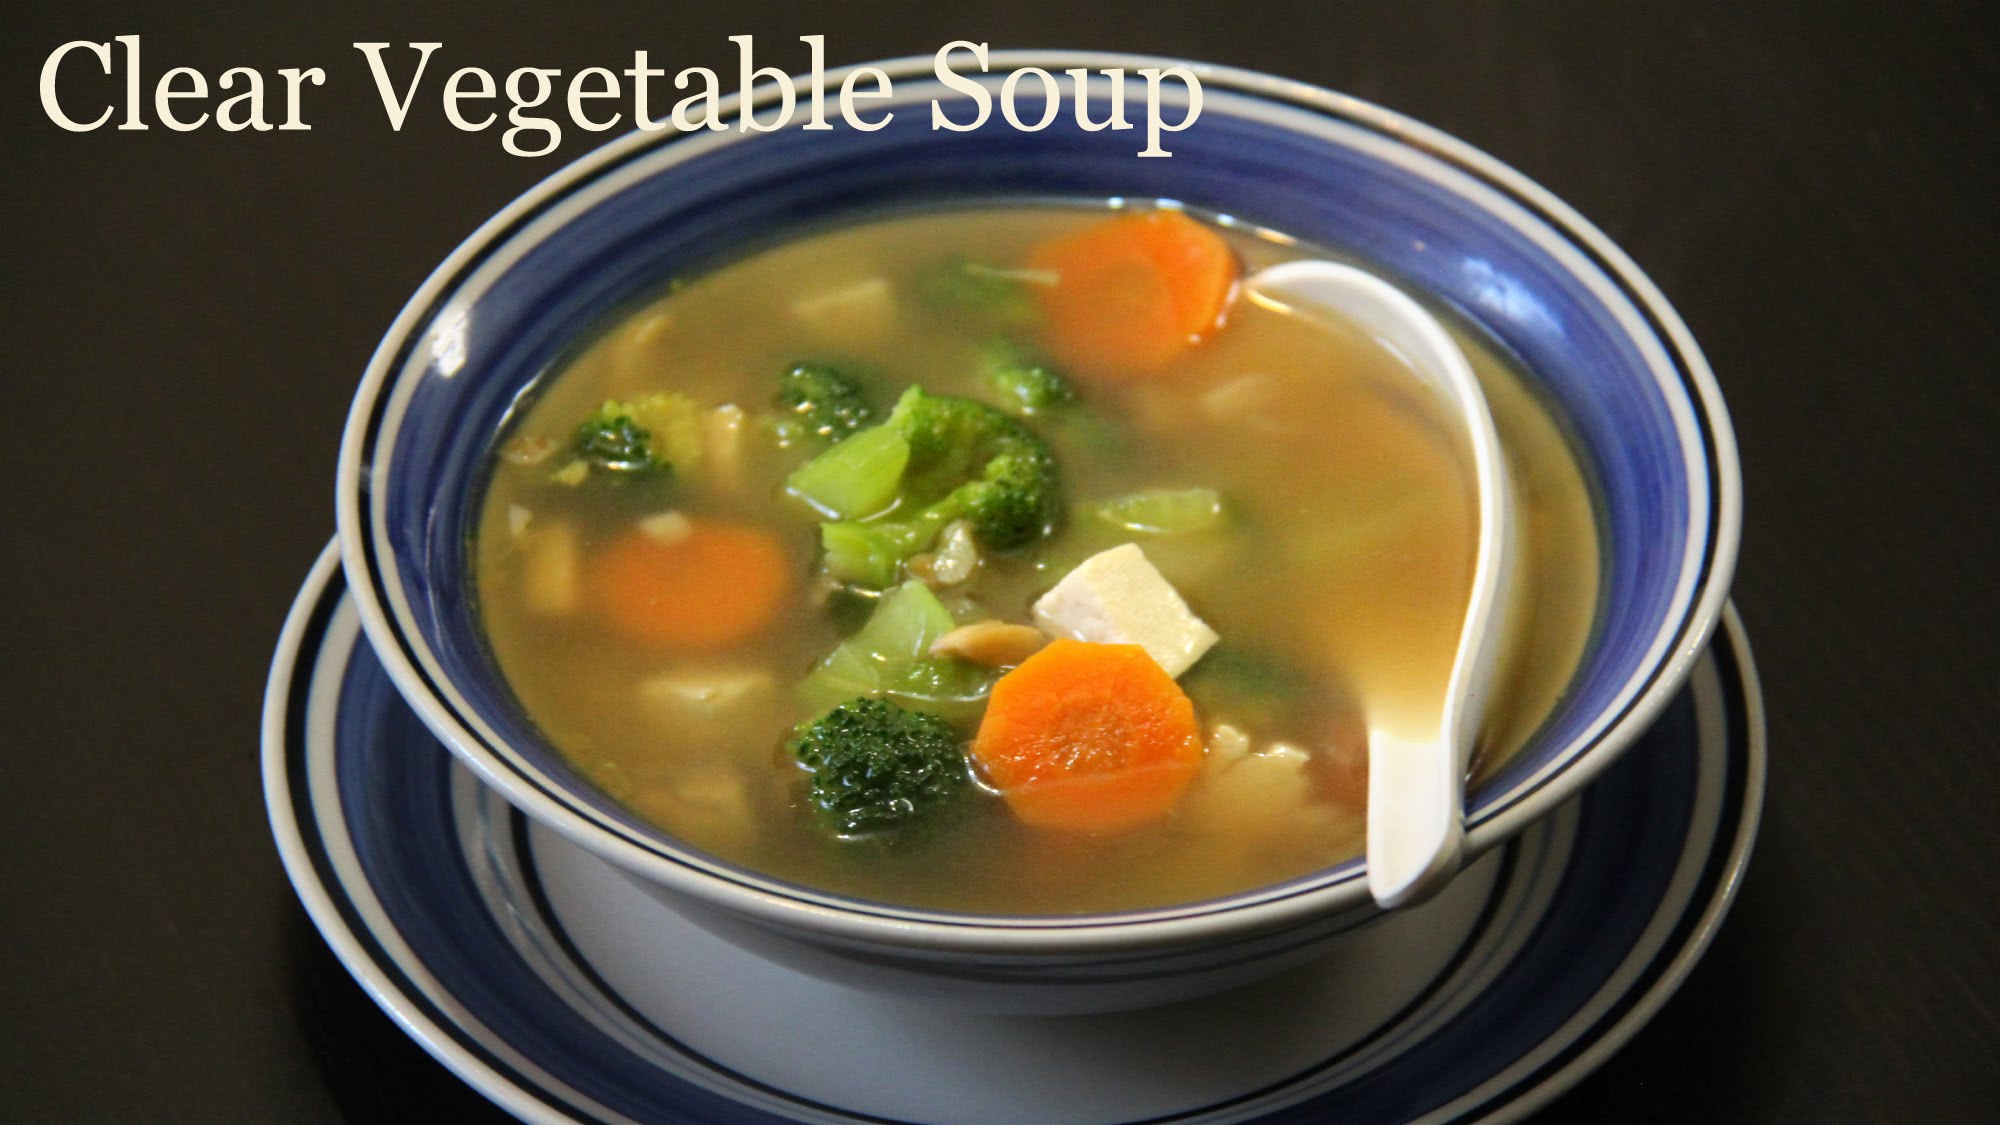 Clear Vegetable Soup Recipe | Quick & Healthy Vegetarian Soup Recipe ...